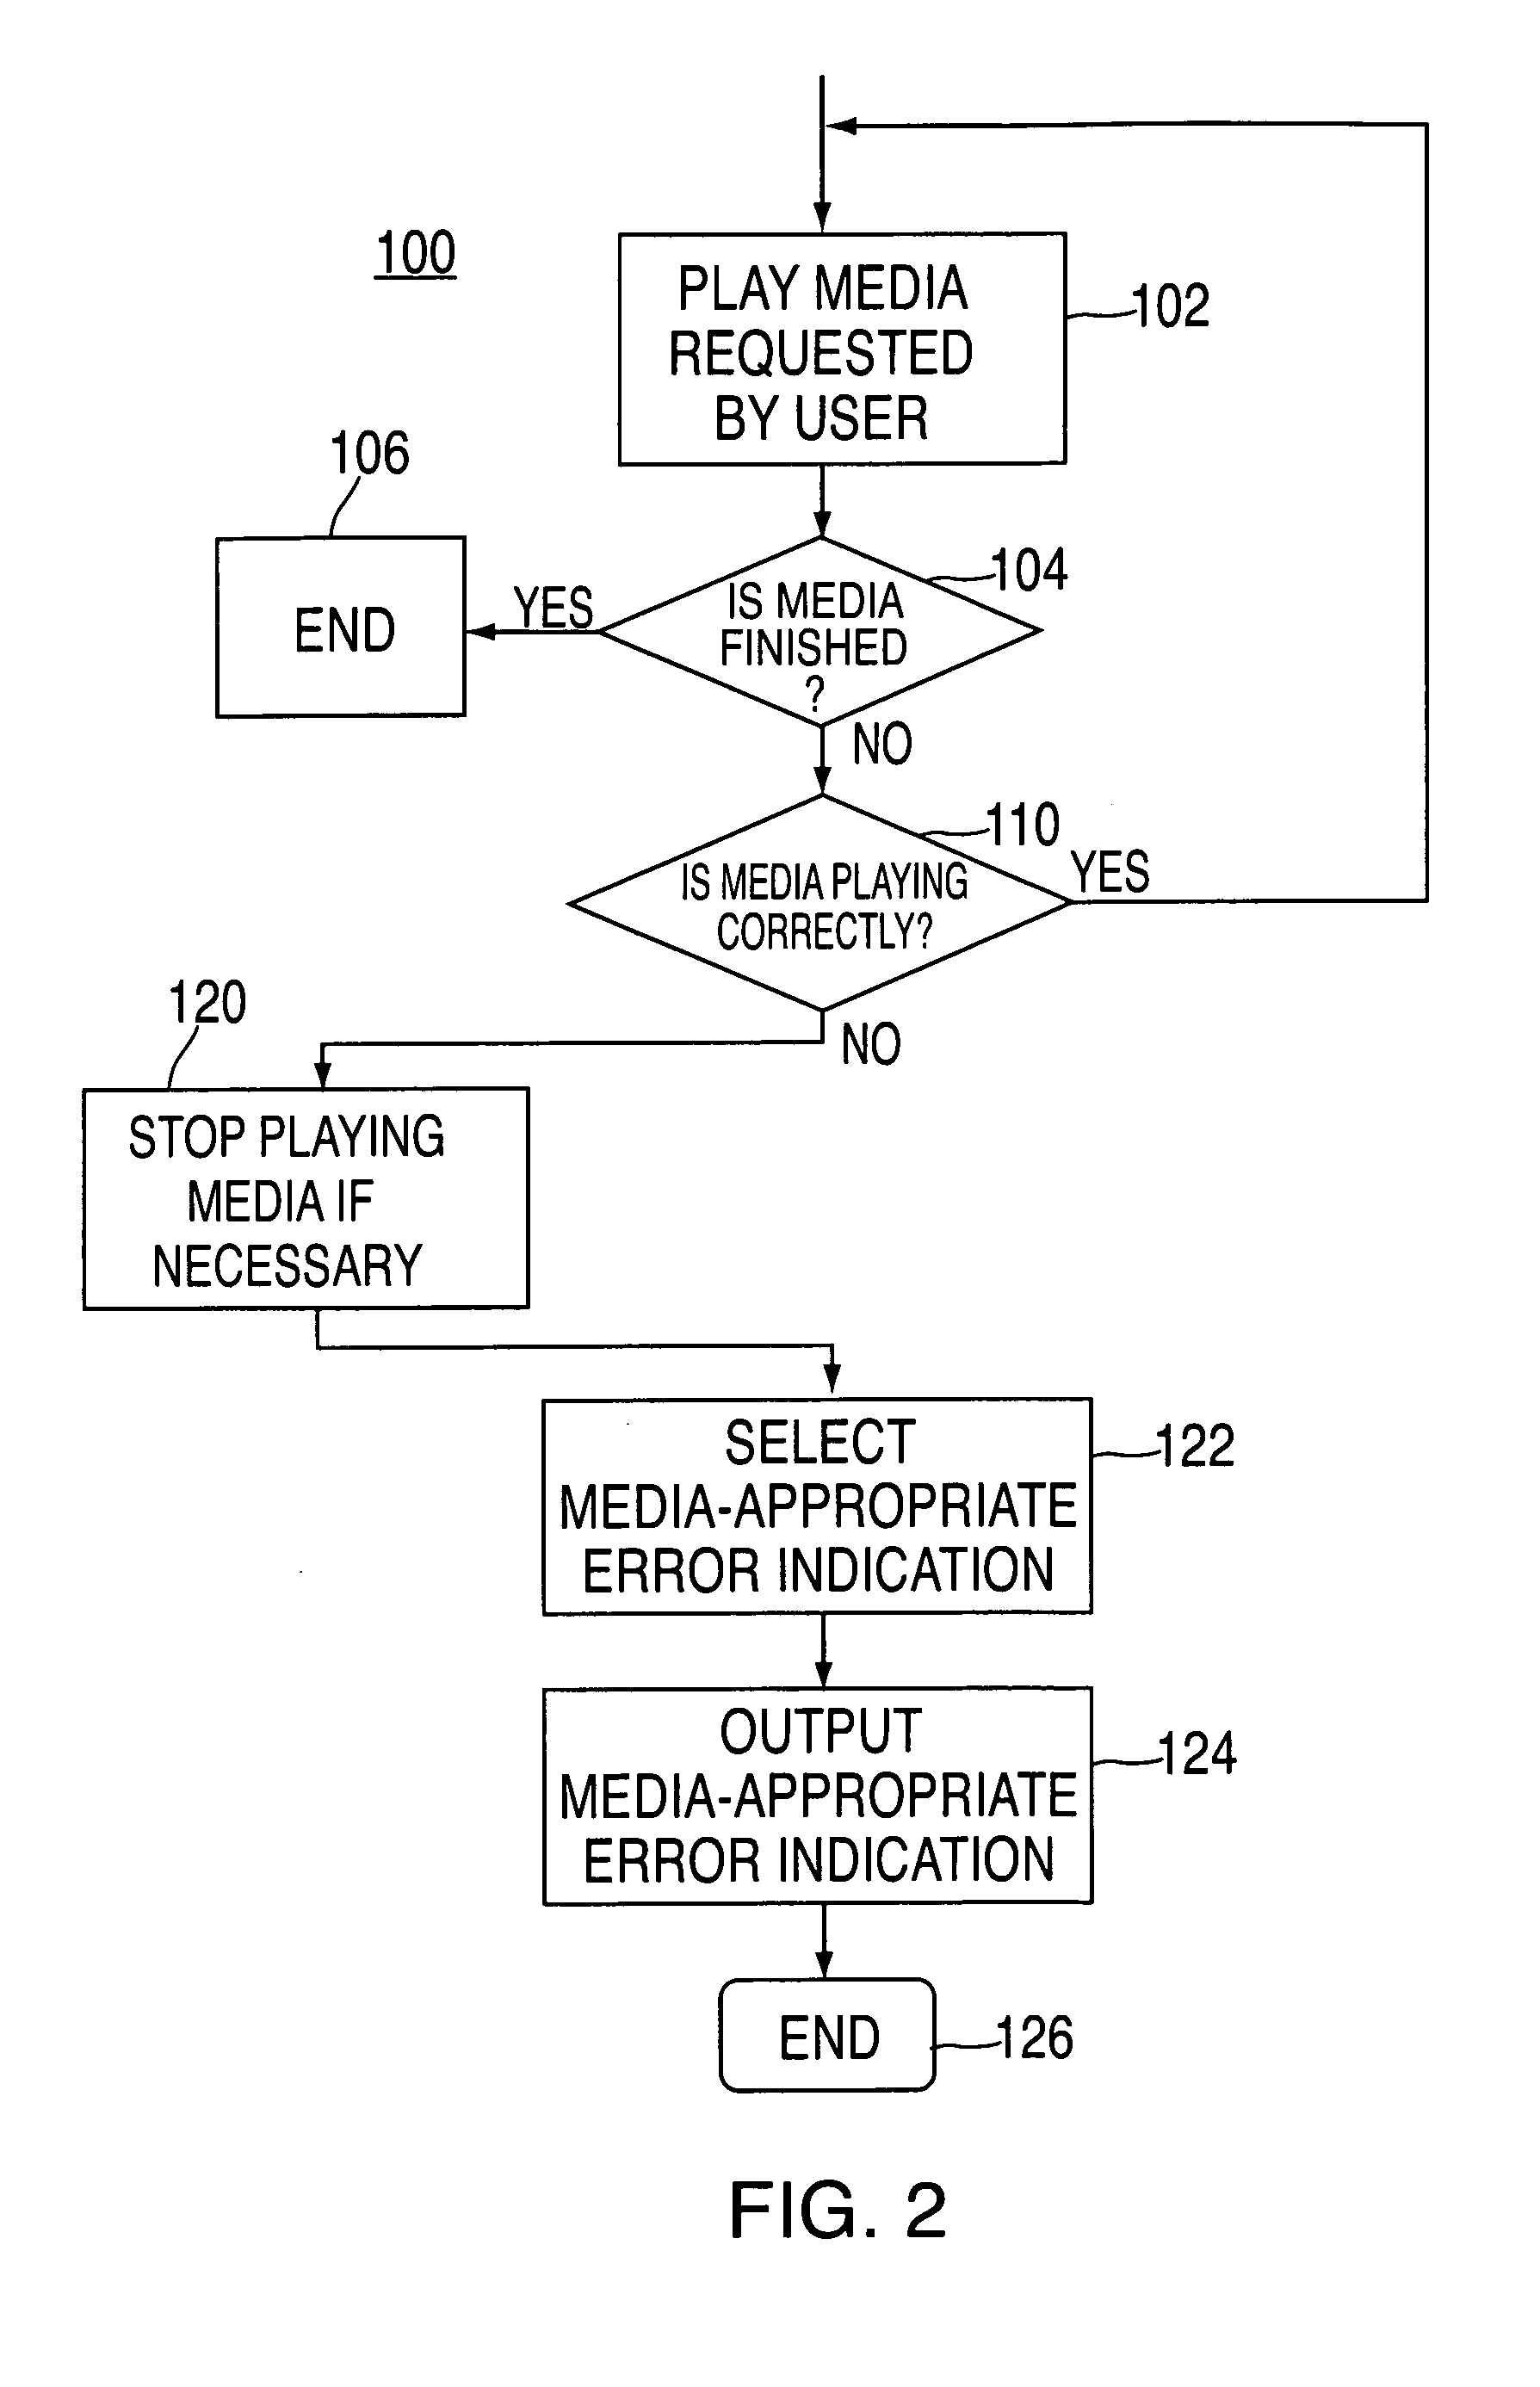 Context-based error indication methods and apparatus